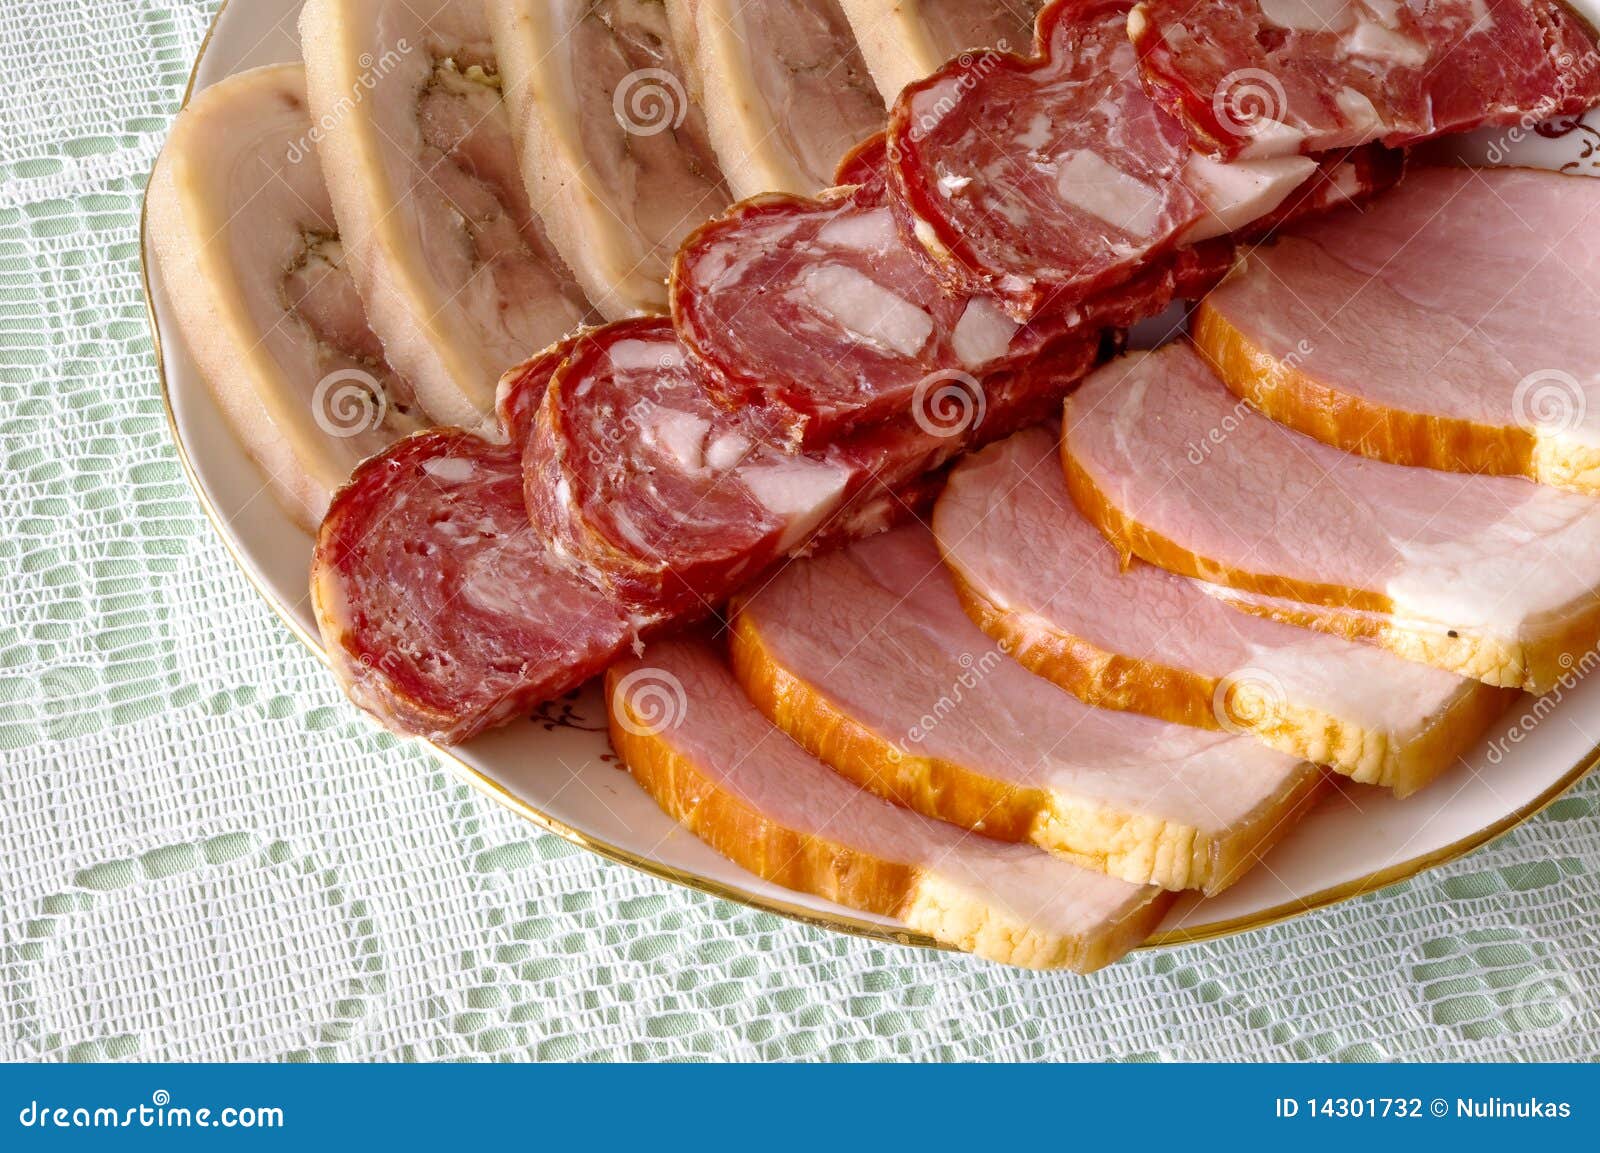 Cured meat stock photo. Image of meat, cured, plate, cold - 14301732